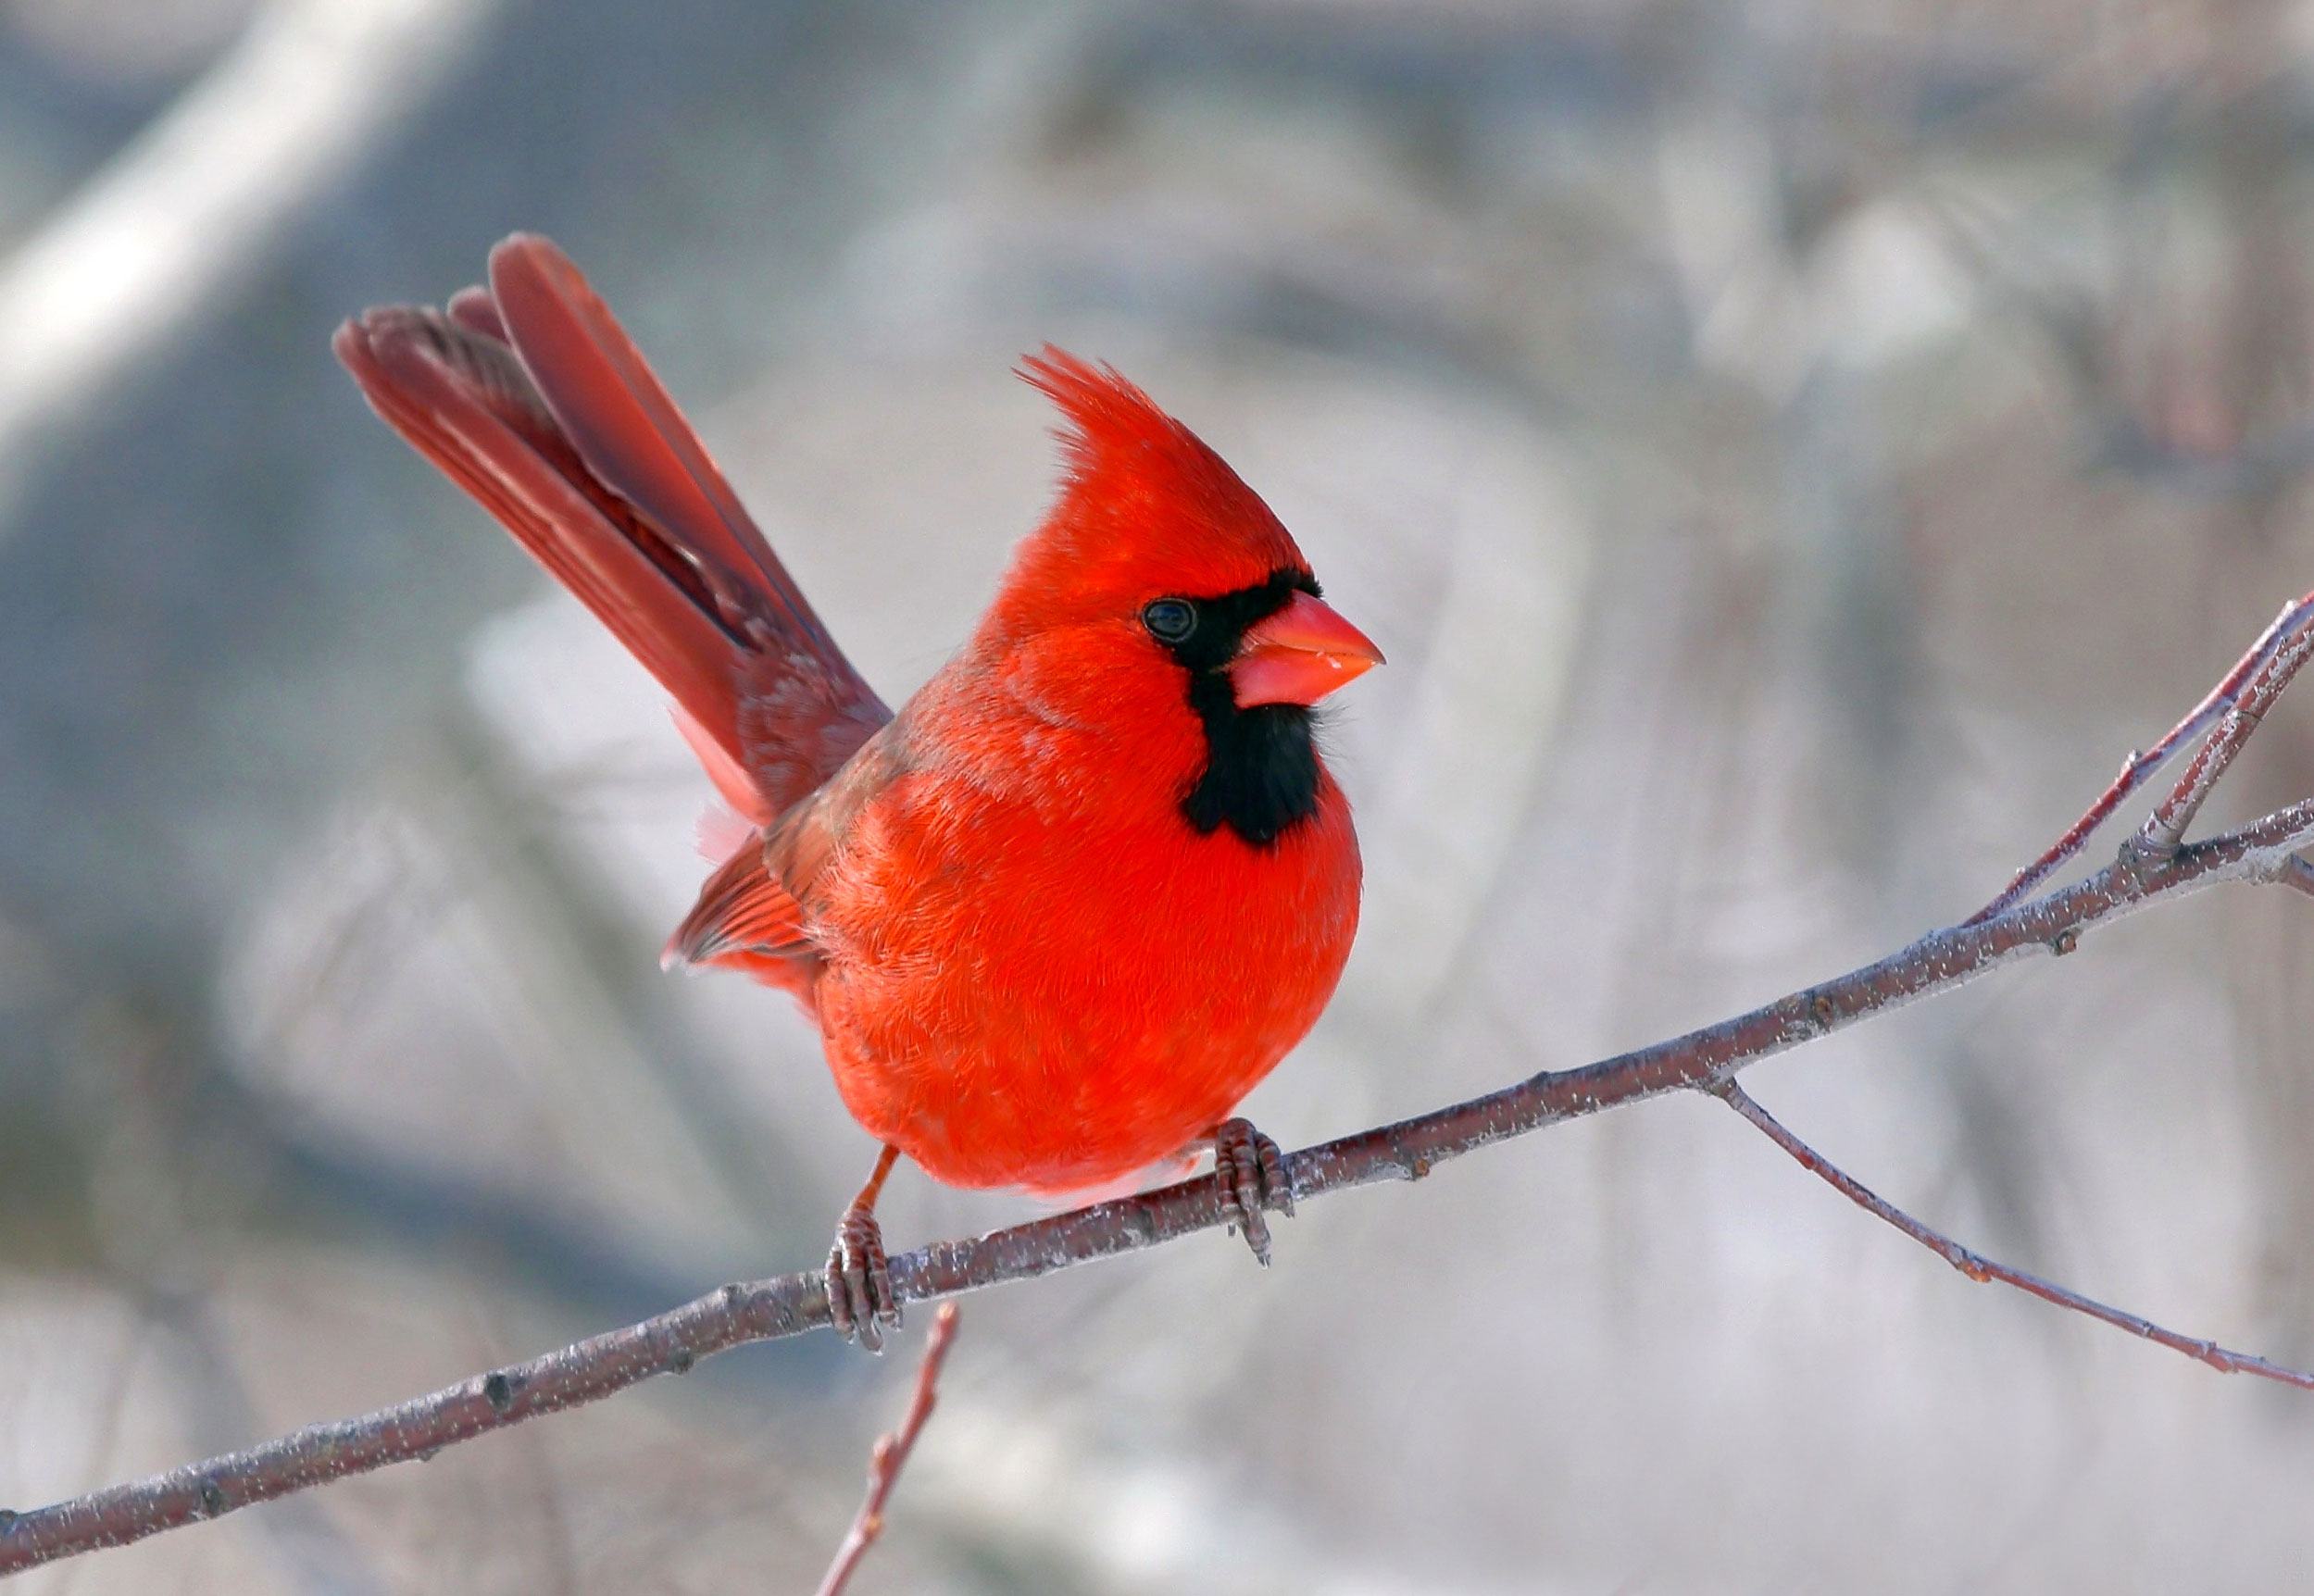 Photo for: Northern Cardinal Emerges as 2021 Tournament of Birds Champ